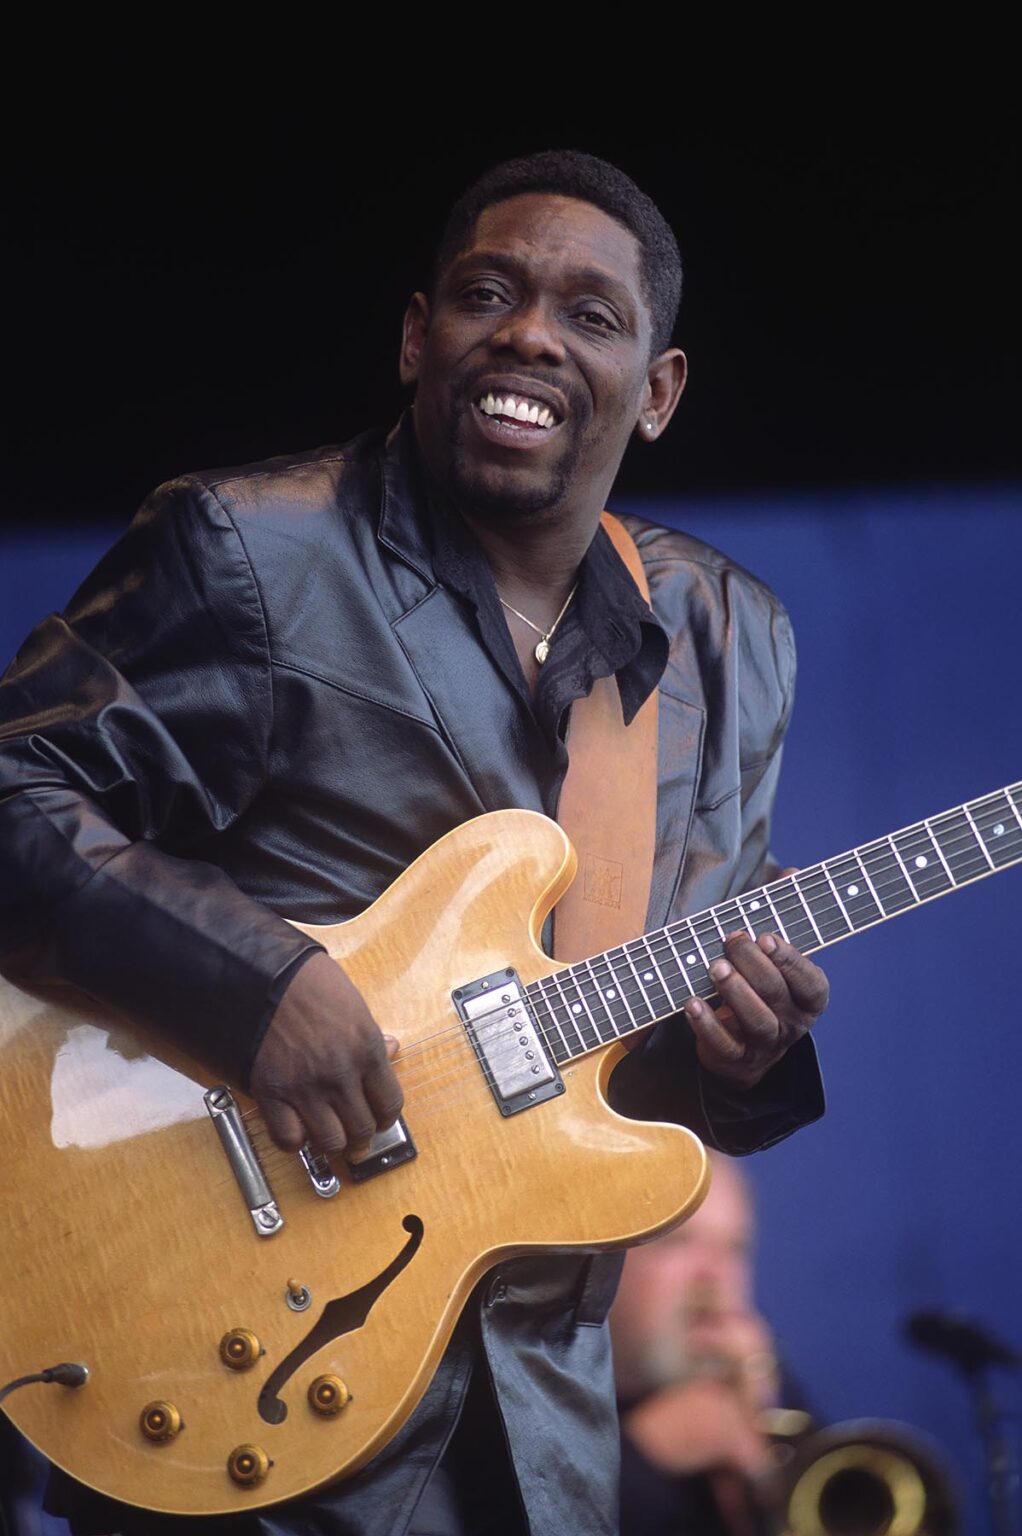 LUCKY PETERSON electrifies the crowd with his lead guitar and vocals at the MONTEREY JAZZ FESTIVAL